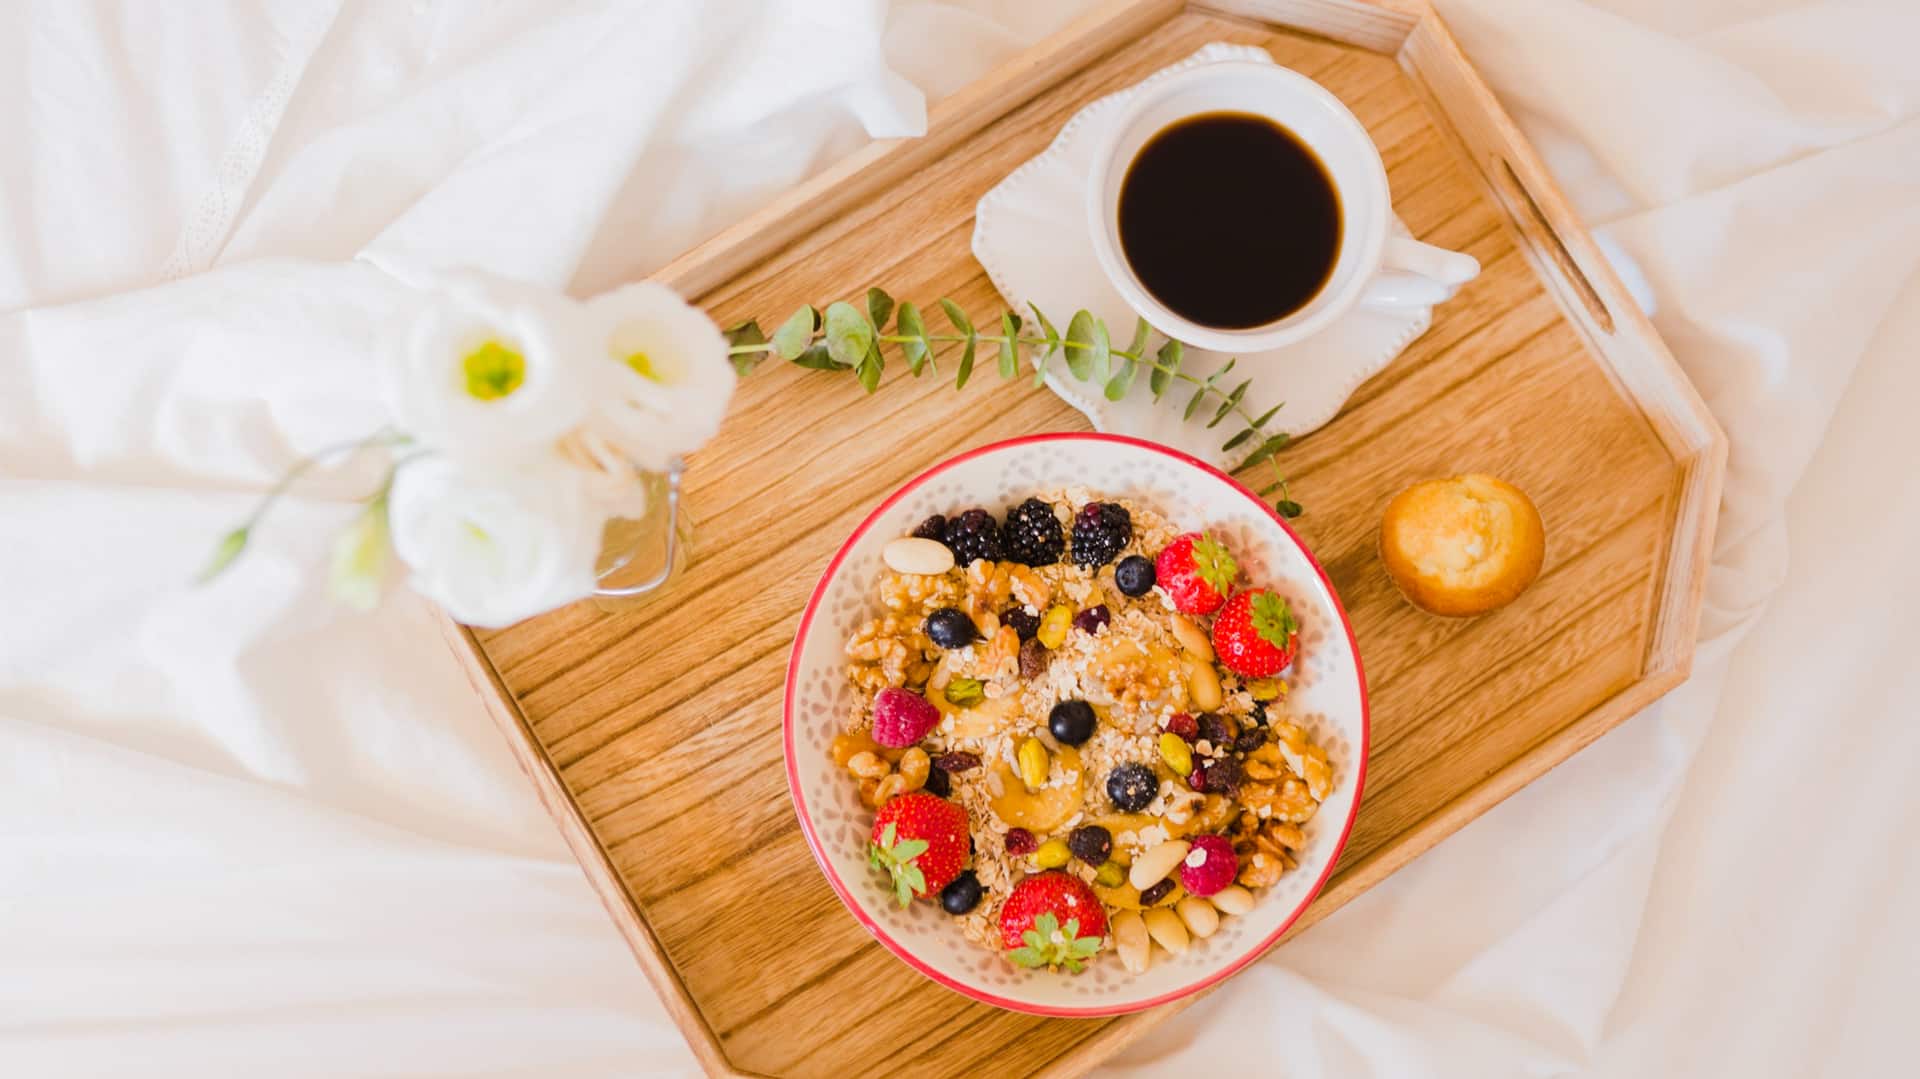 How your morning meal sets the tone for the day